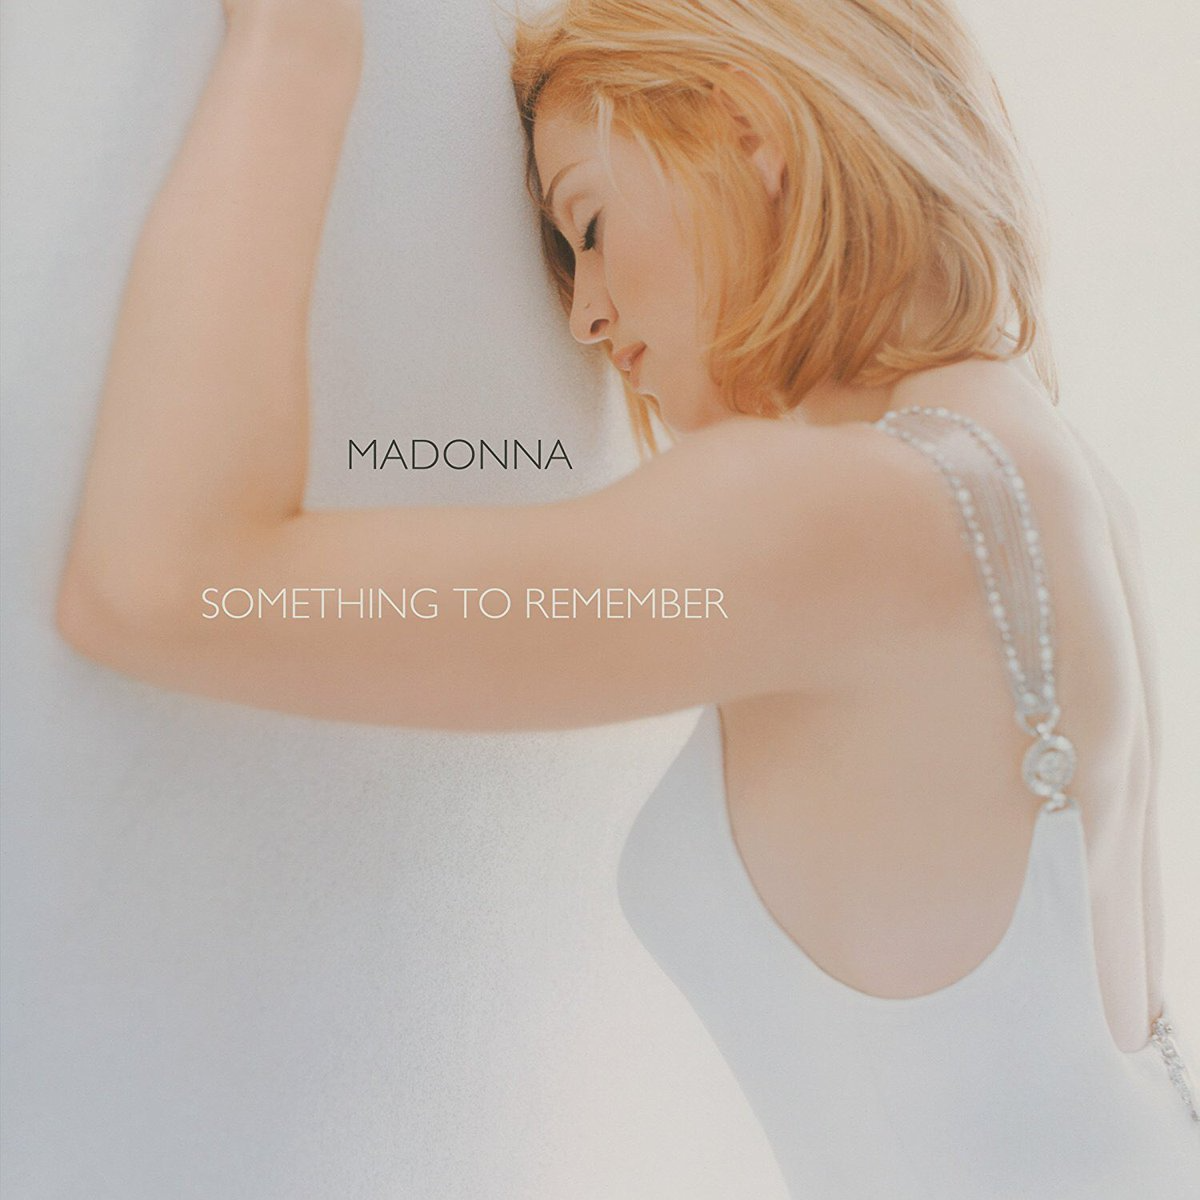 Madonna-Something To Remember-DELUXE EDITION-CD-FLAC-1995-MAHOU Download